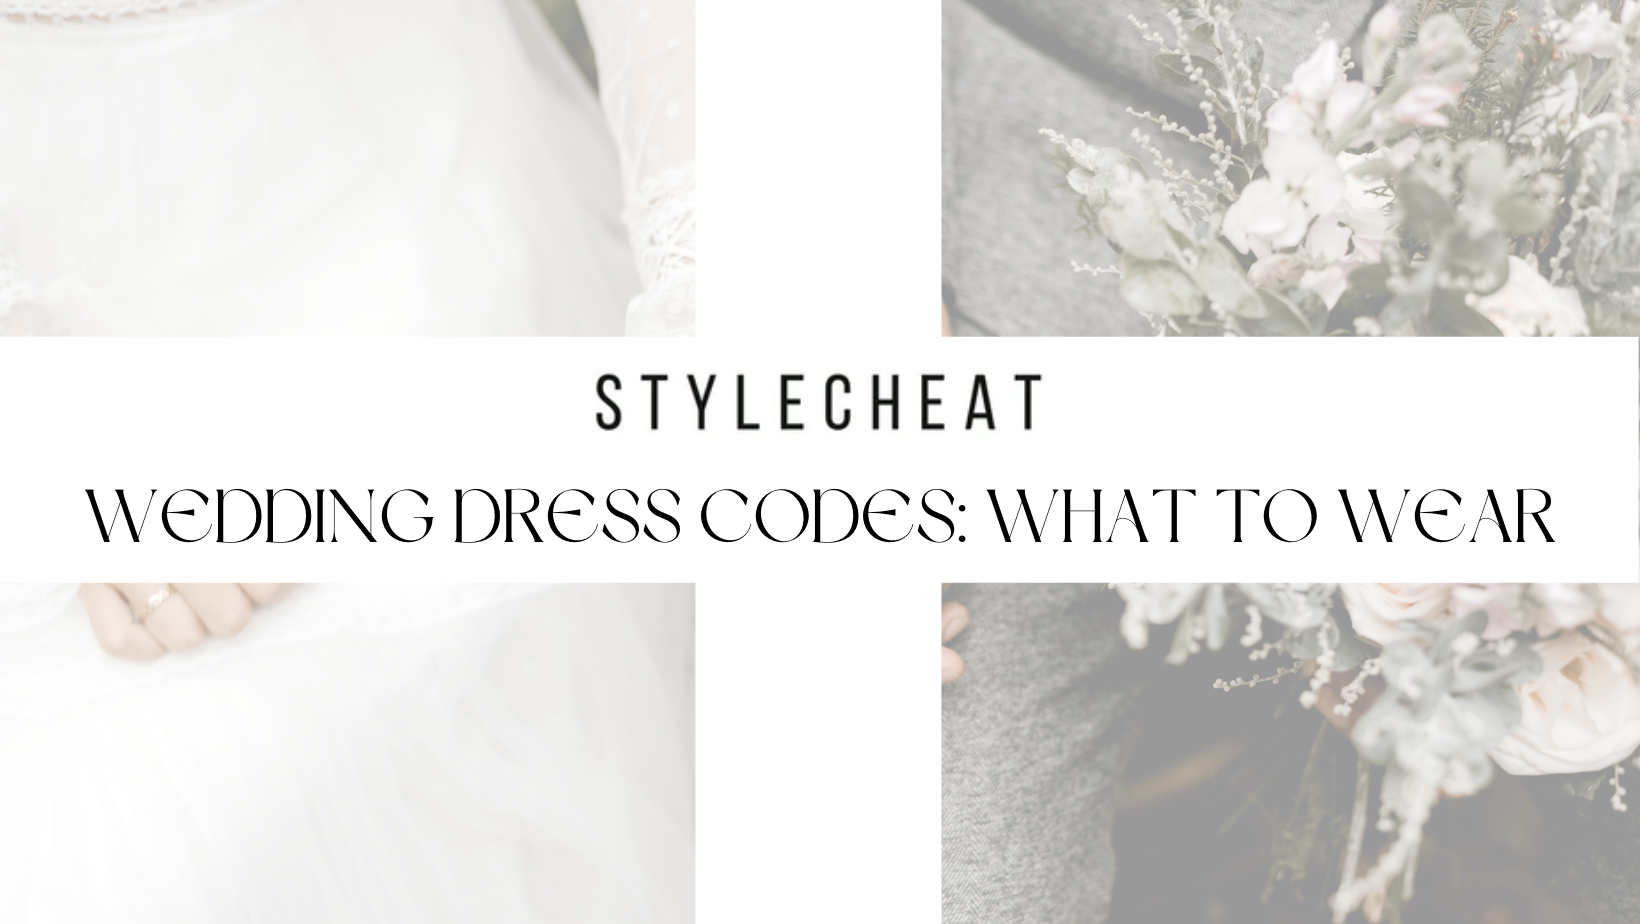 How To Understand Wedding Dress Code Wording and What To Wear